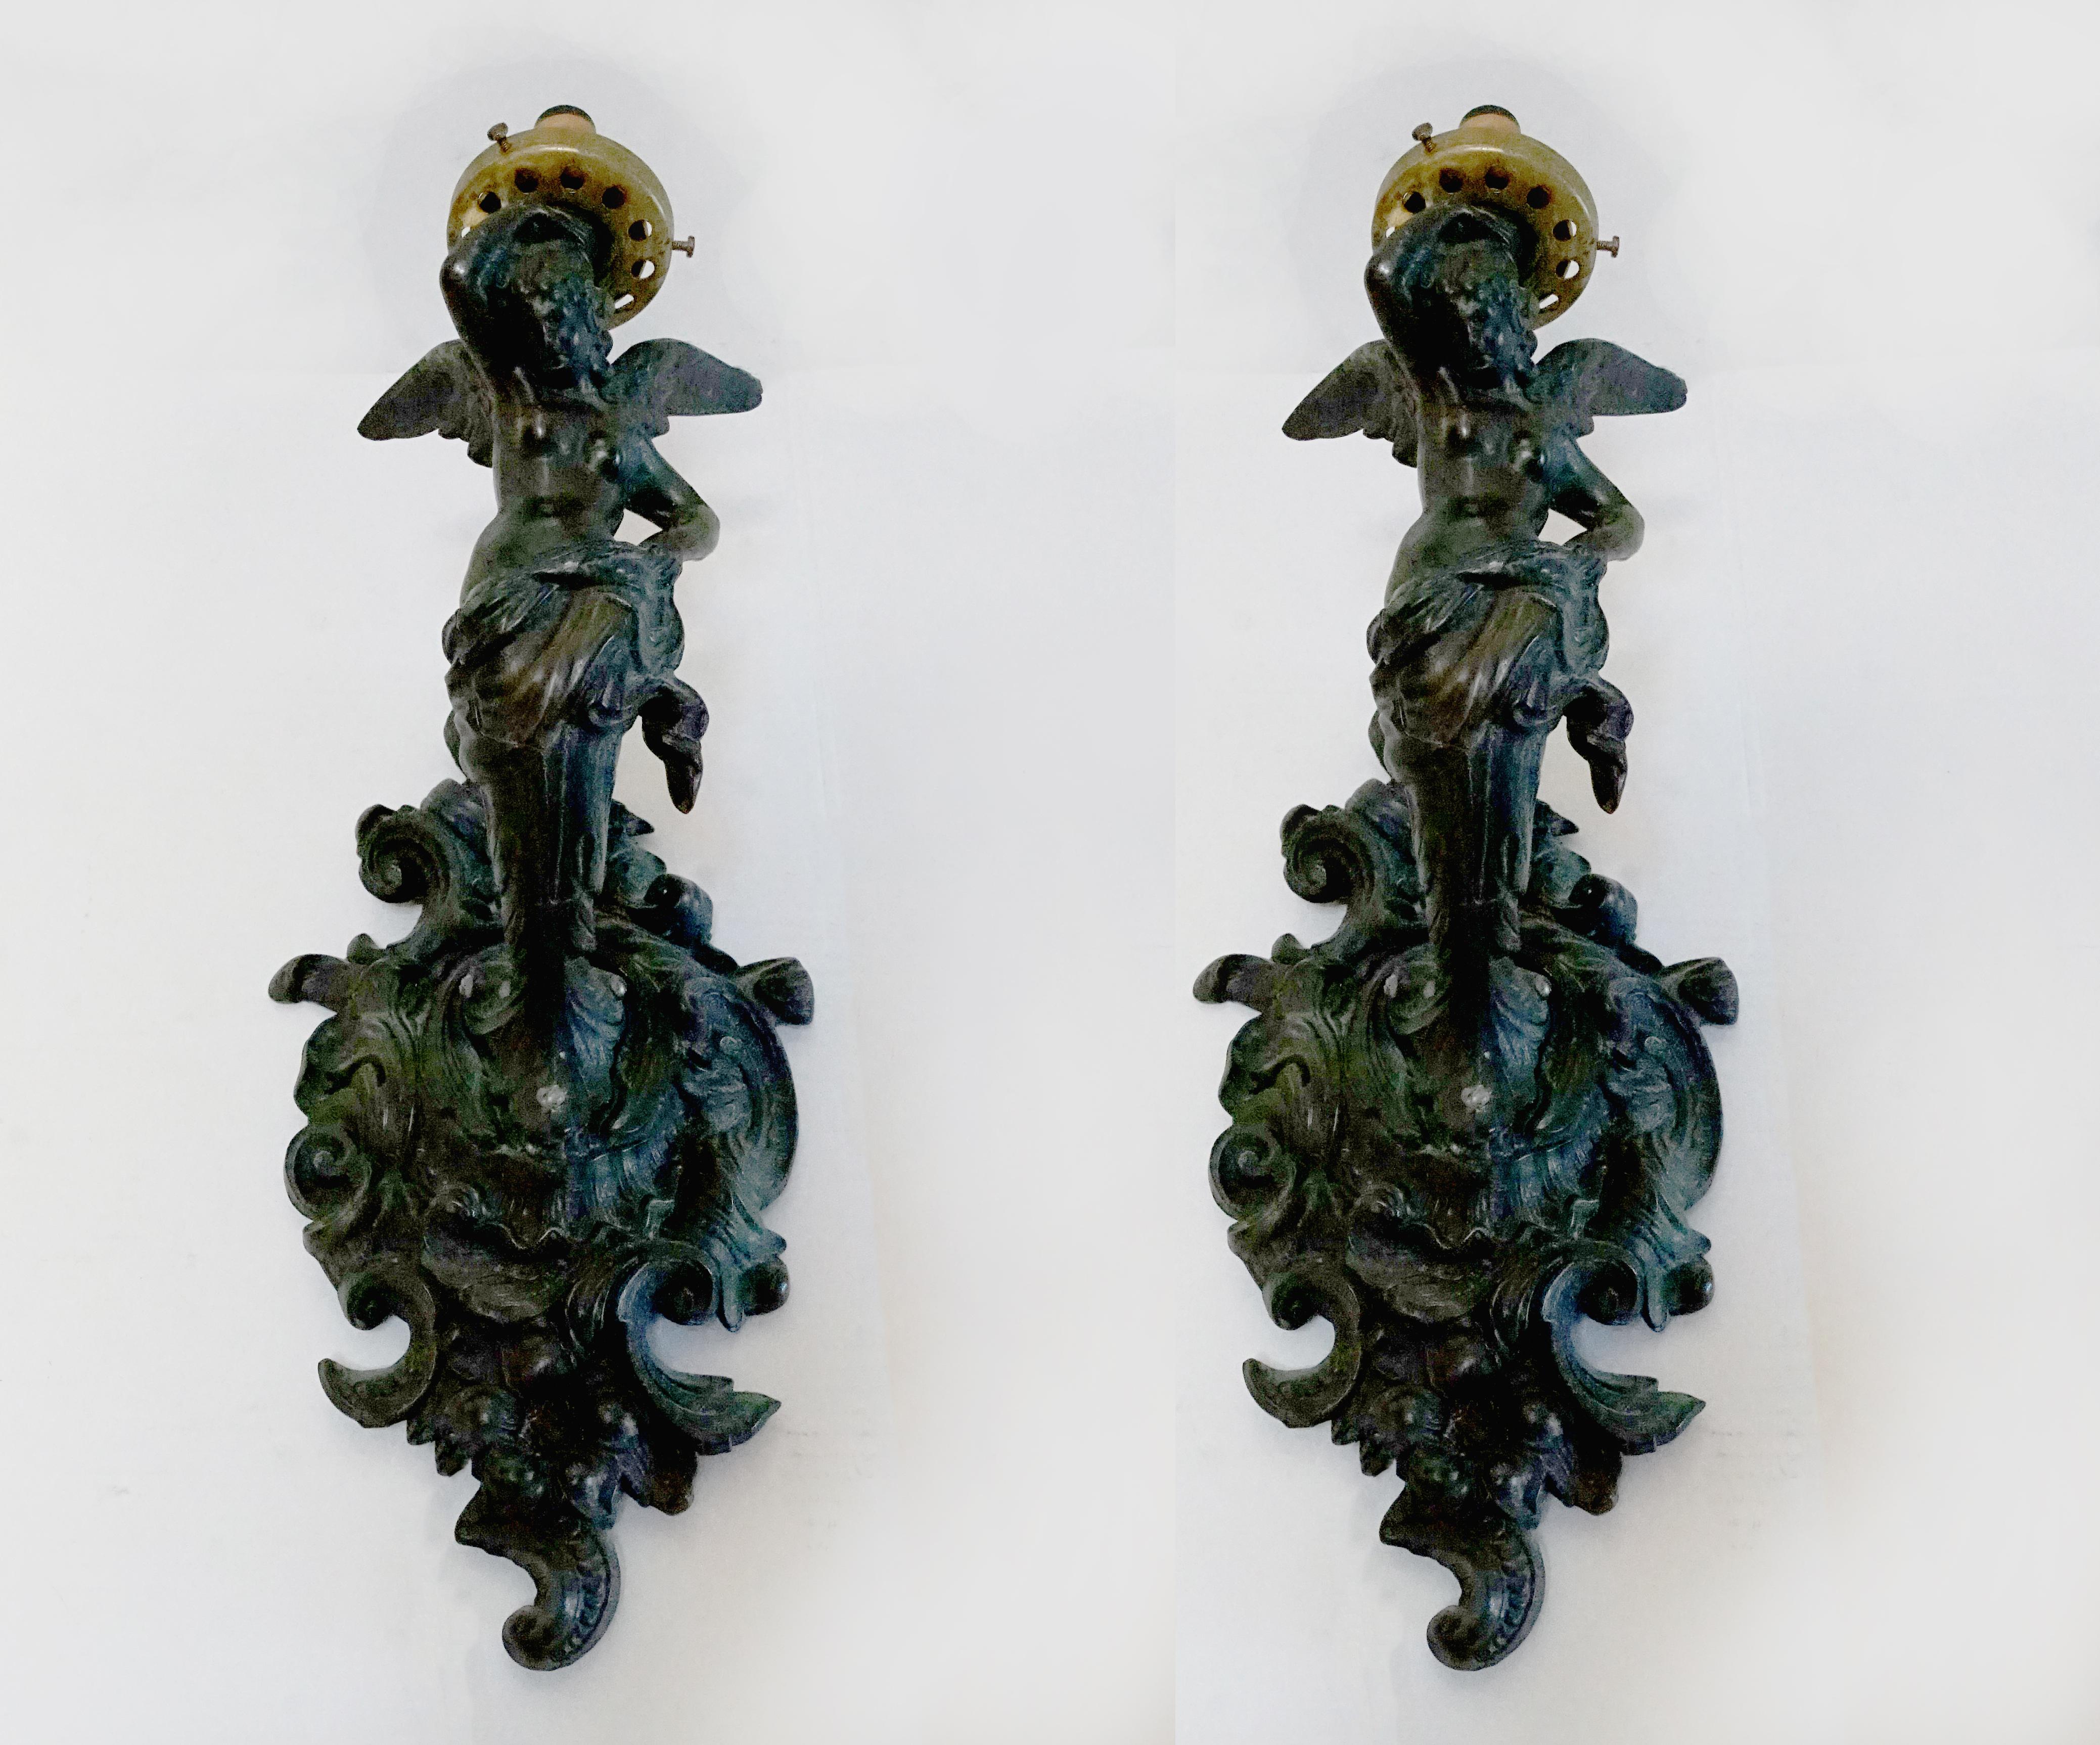 This pair of Rococo Revival cast bronze figural sconces attracted attention at an estate sale auction in Los Angeles. We found them irresistible. We are still scouring the pieces intermittently for a mark, but our appraiser is confident they are